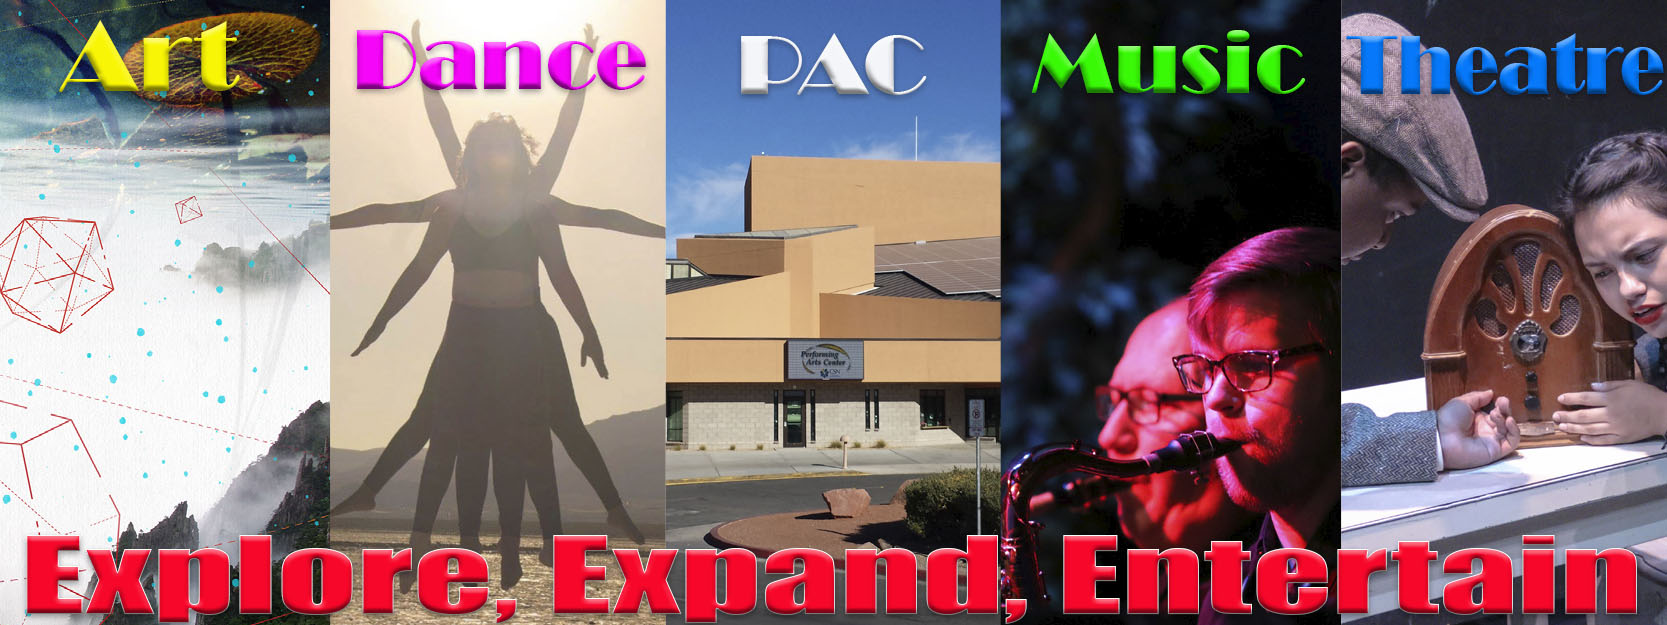 Explore and experience the performing arts